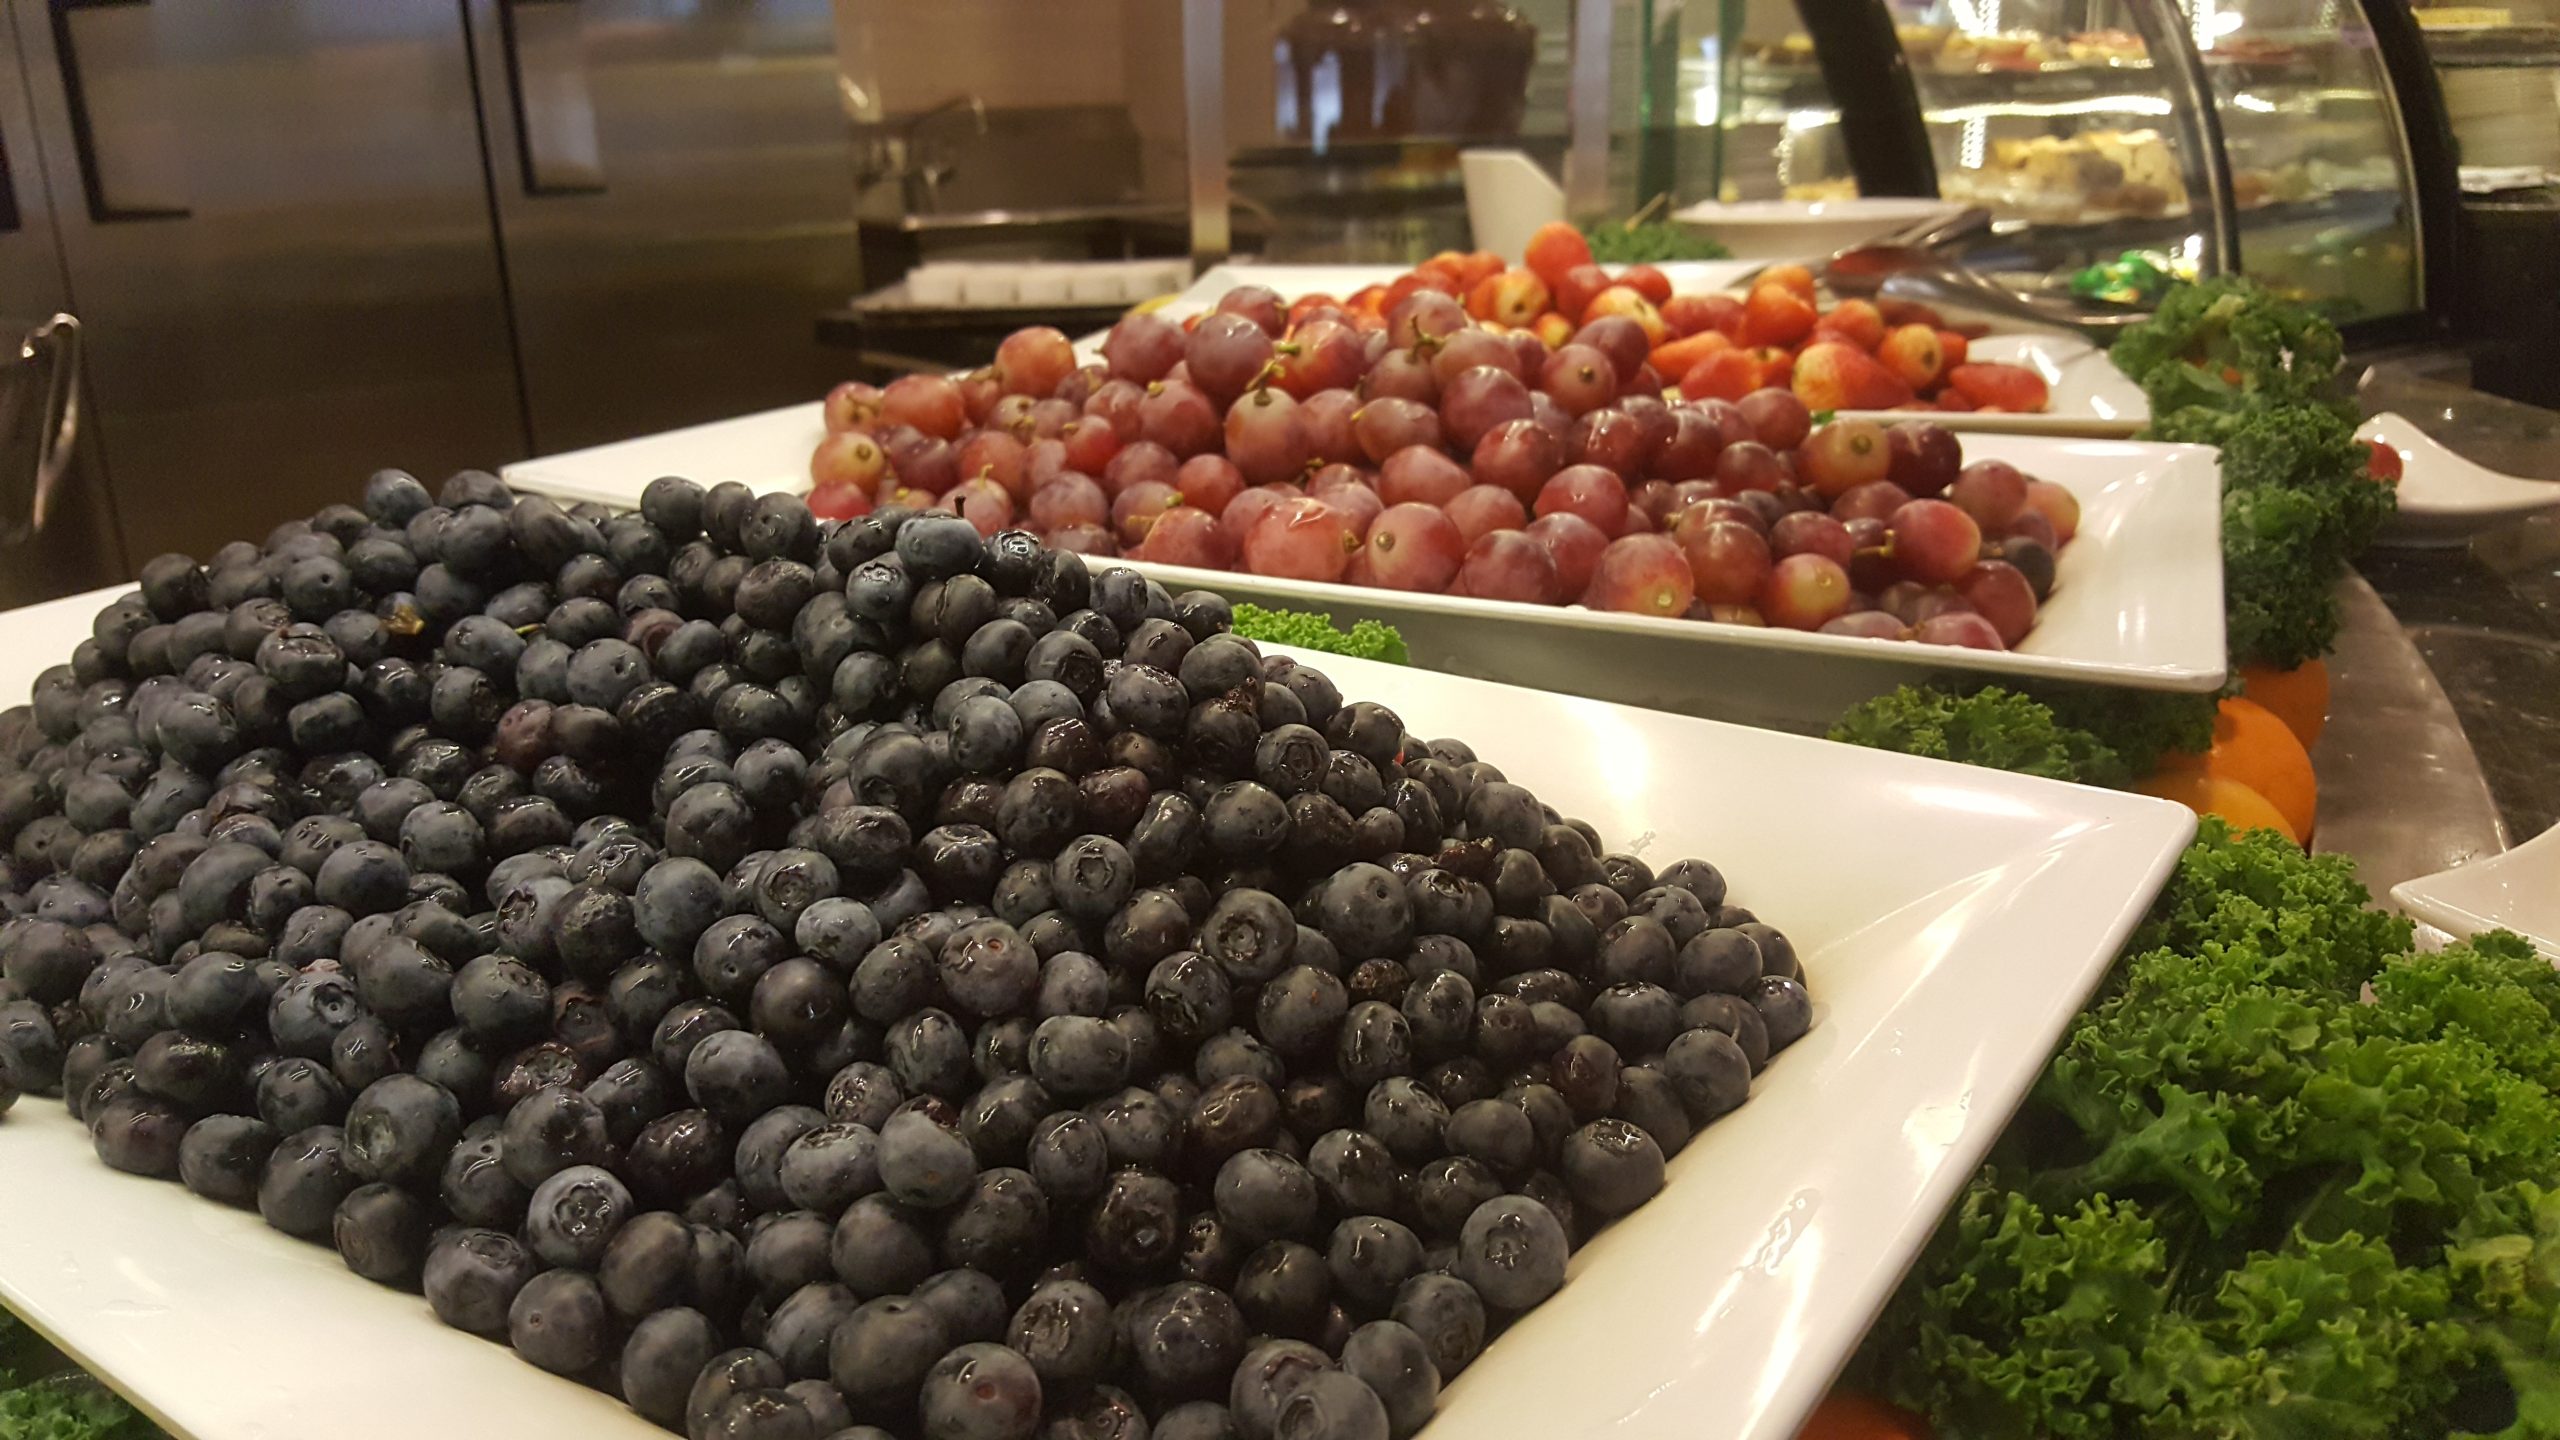 Blueberries and grapes